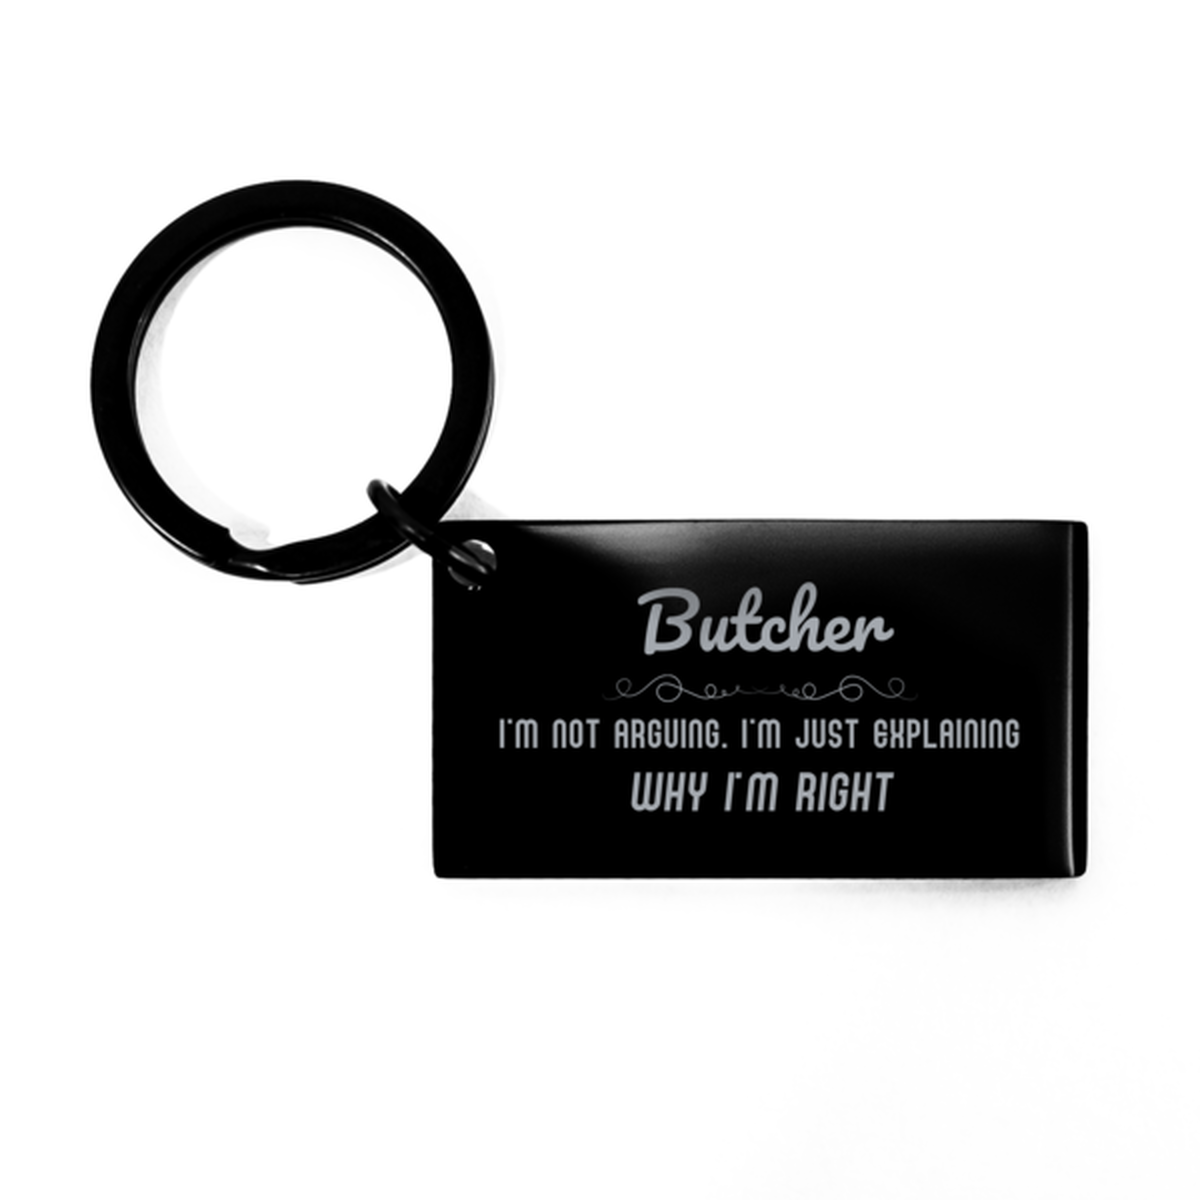 Butcher I'm not Arguing. I'm Just Explaining Why I'm RIGHT Keychain, Funny Saying Quote Butcher Gifts For Butcher Graduation Birthday Christmas Gifts for Men Women Coworker